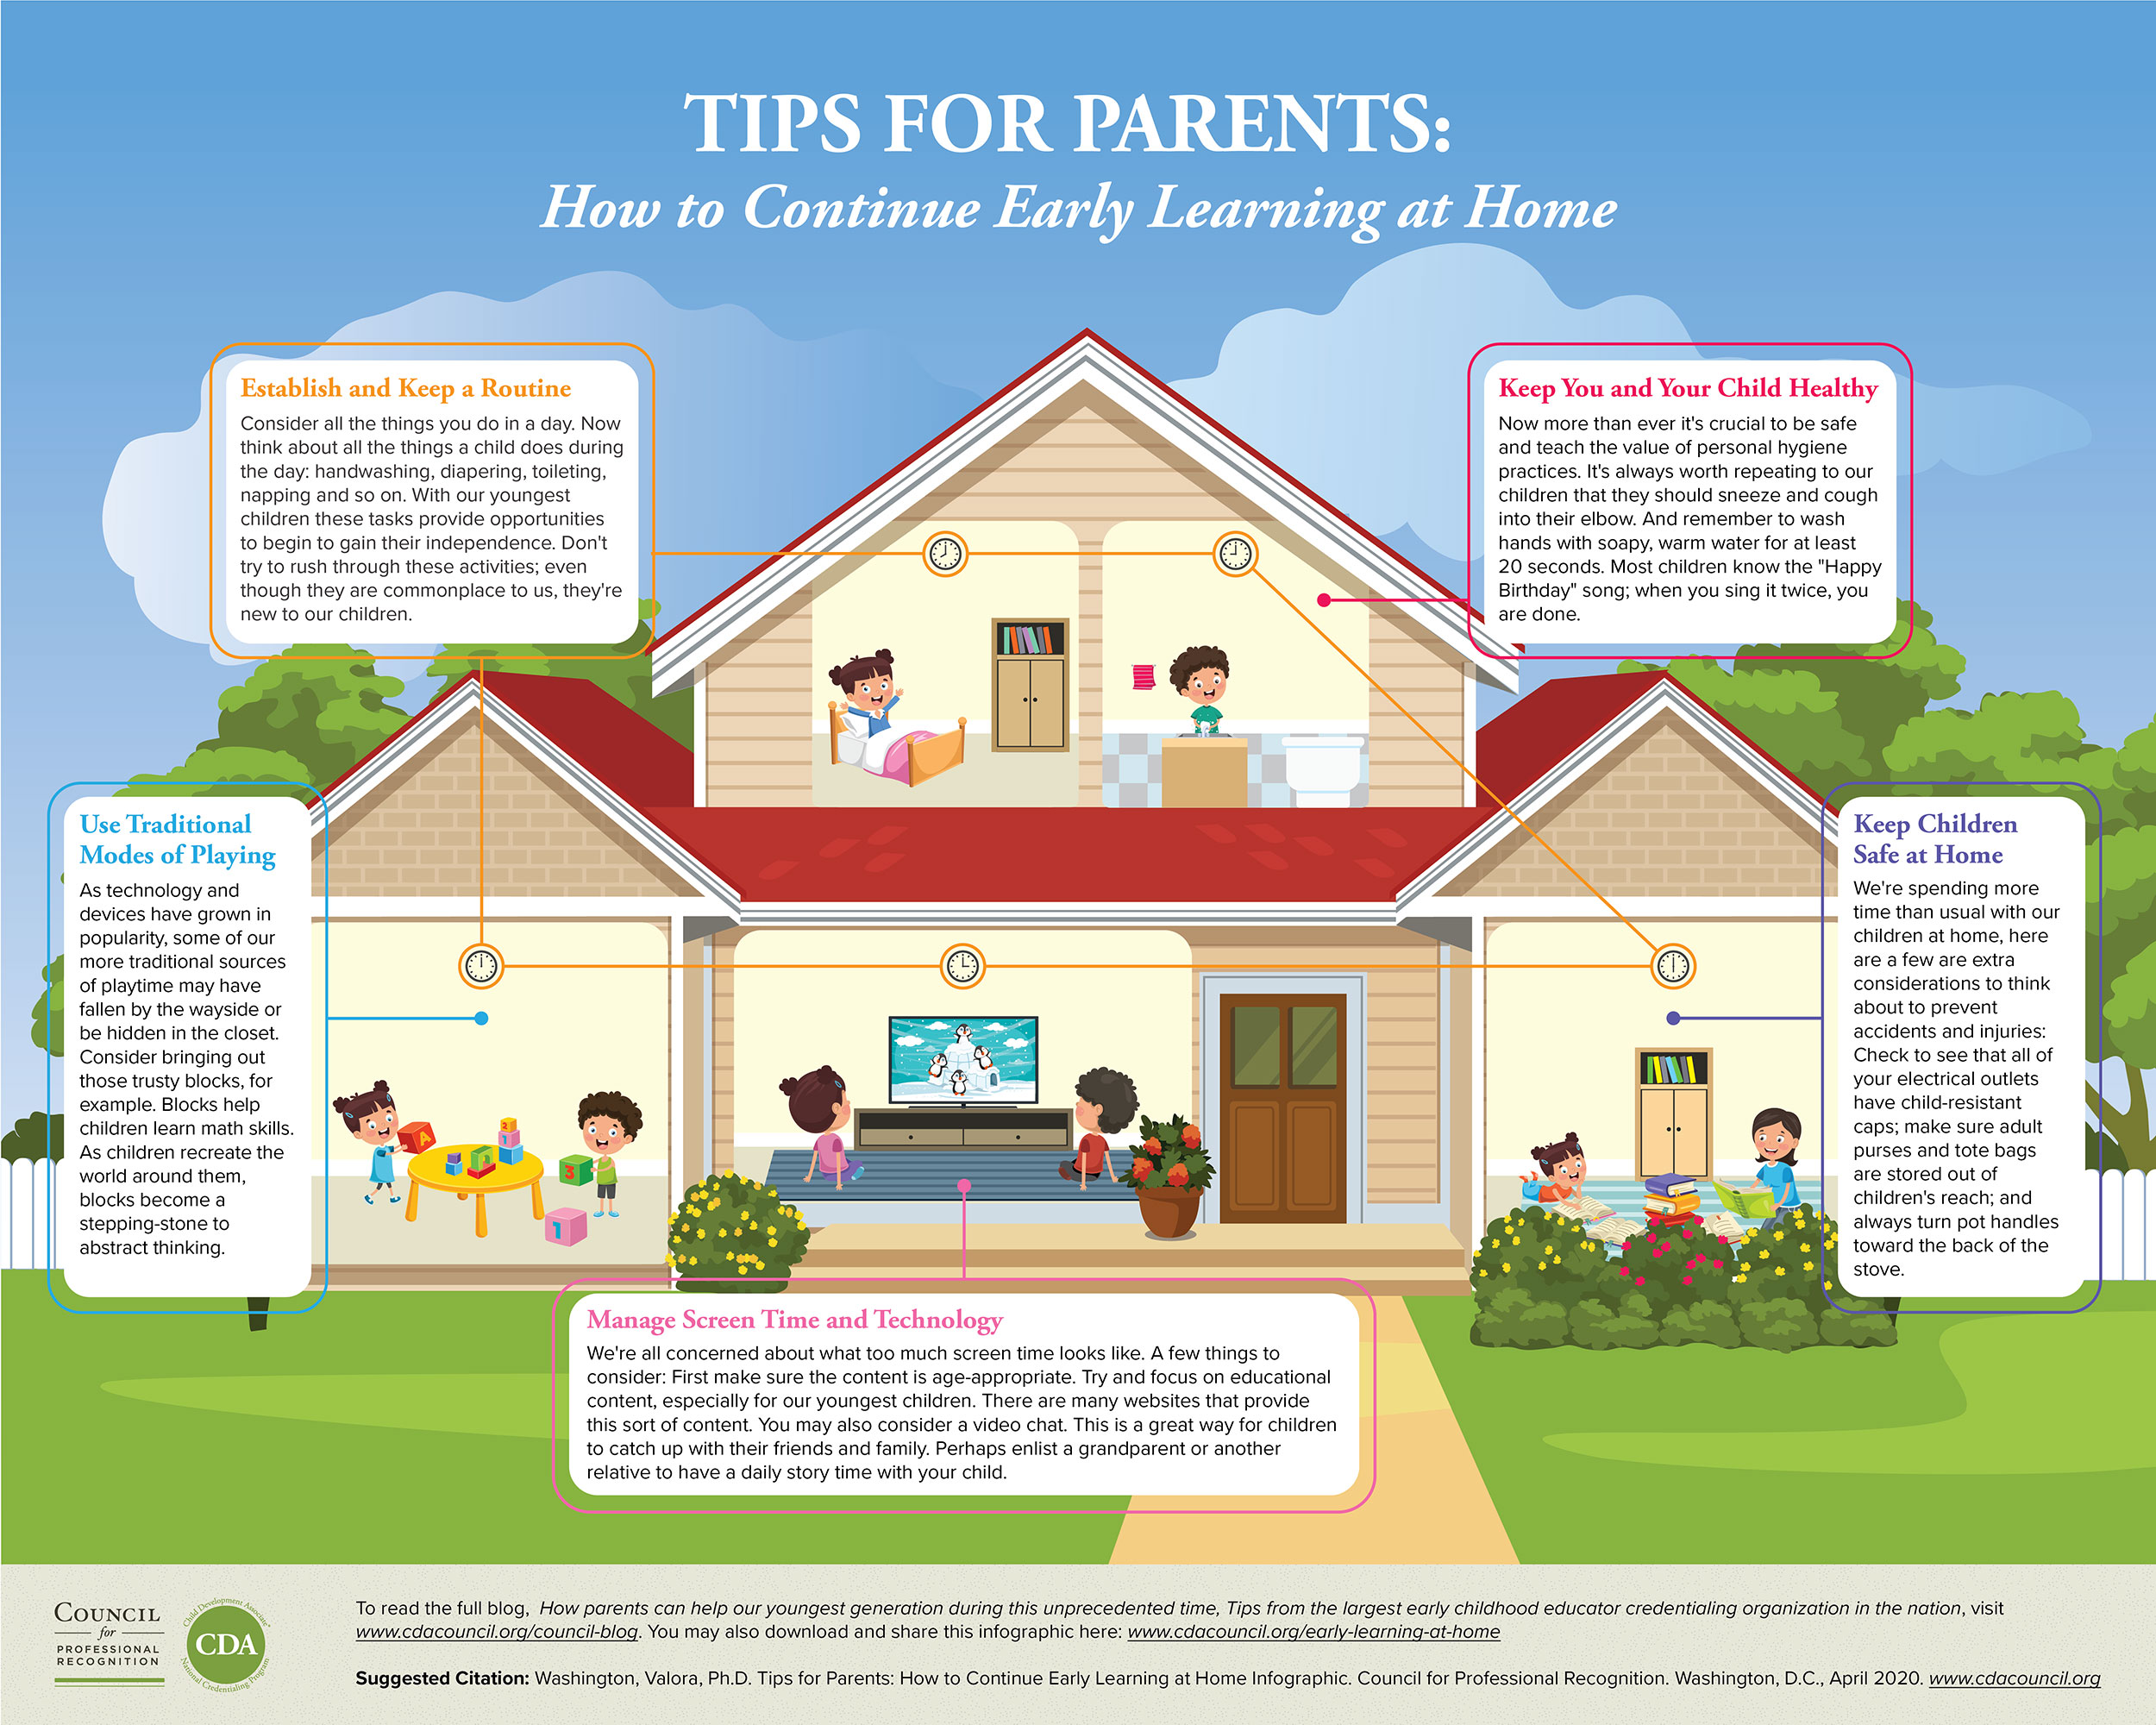 Learning at Home 101: The Parent's Guide to Home Teaching